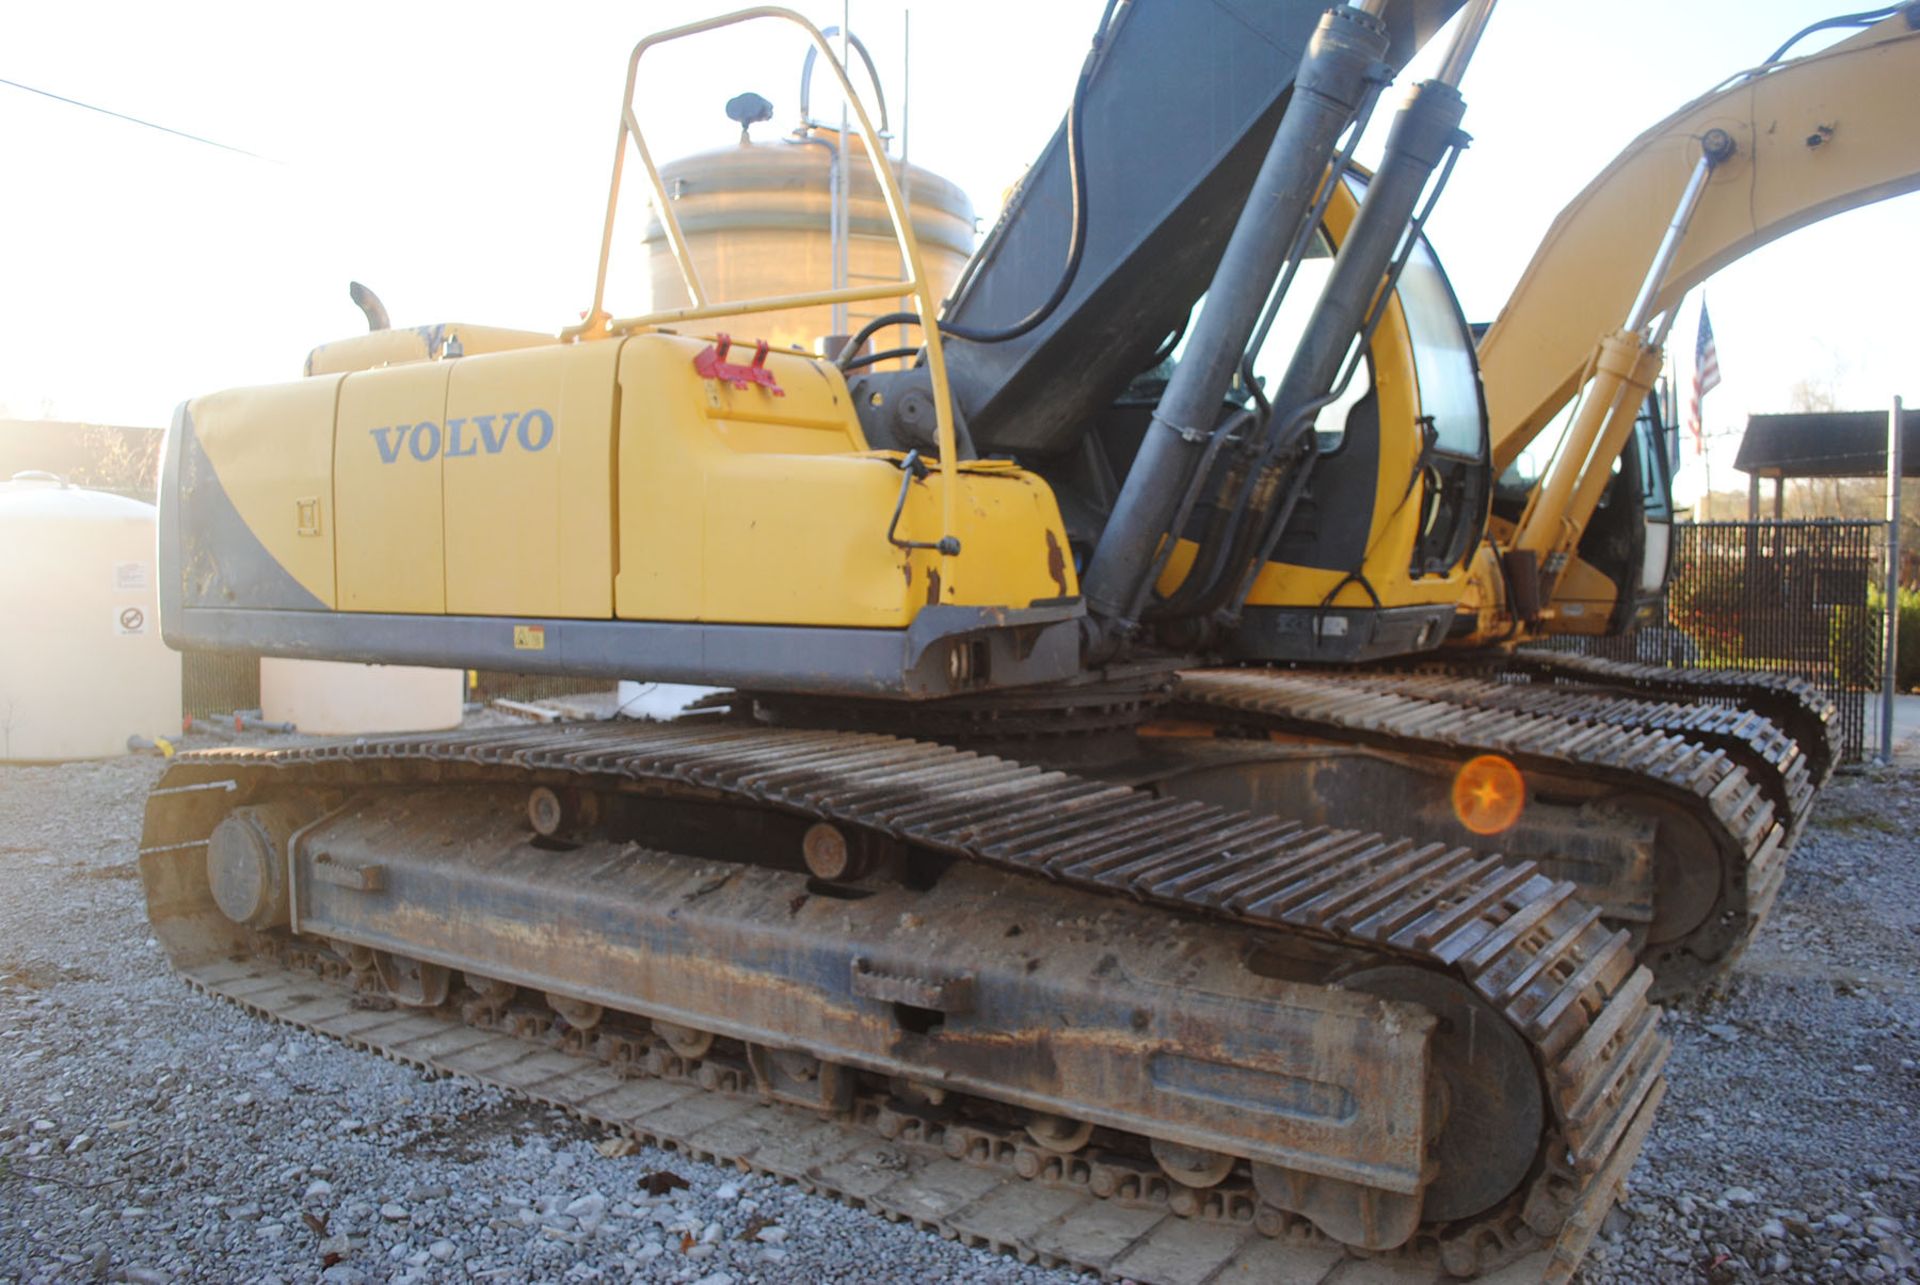 2001 VOLVO E290LC HYDRAULIC EXCAVATOR; PIN EC2906LCC-03657, 10,500 COUNTERWEIGHT, ENCLOSED CAB - Image 4 of 6